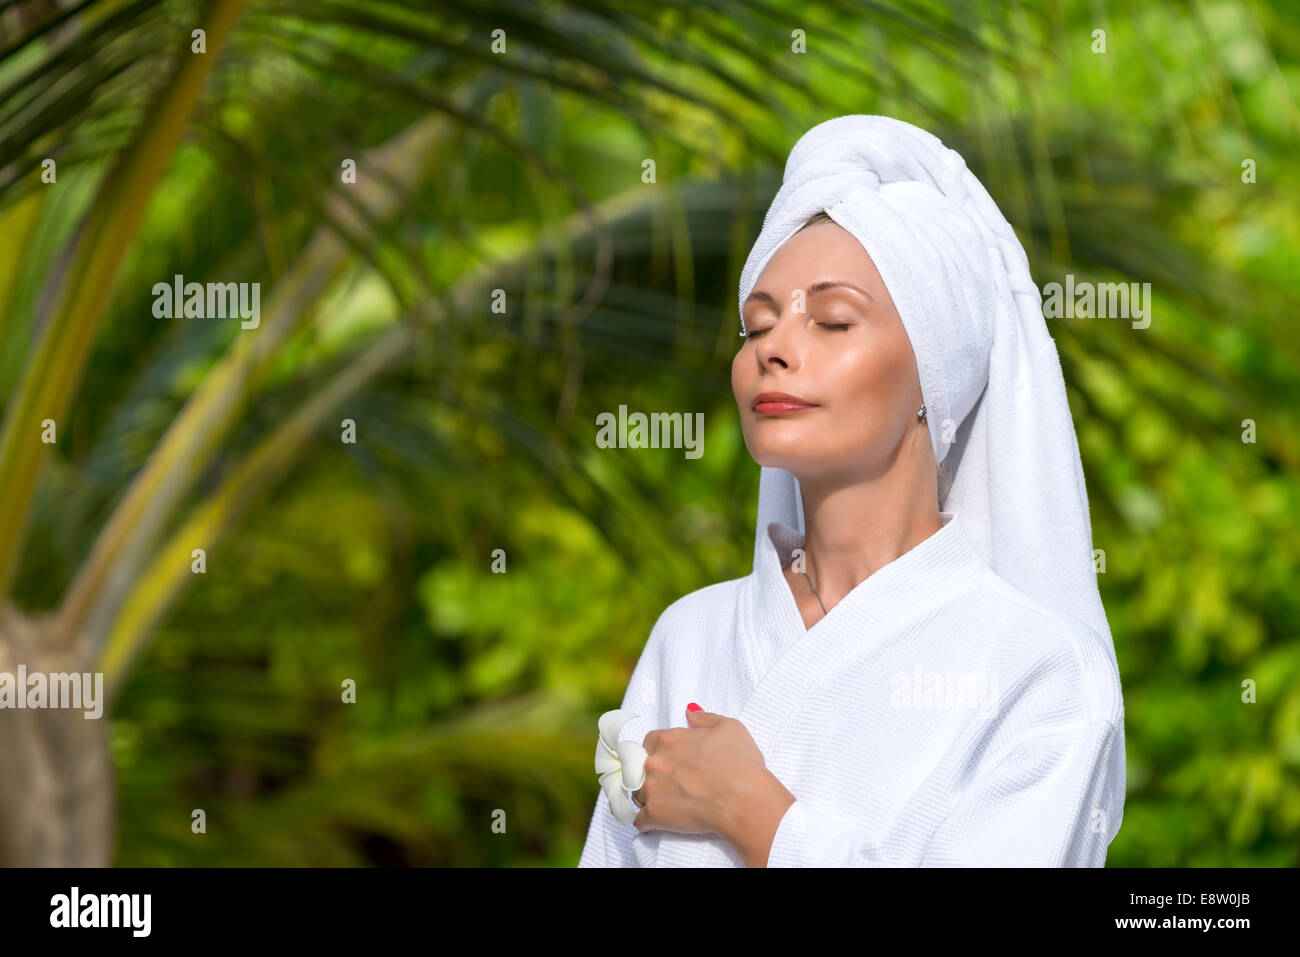 health, spa and beauty concept - beautiful woman in towel Stock Photo